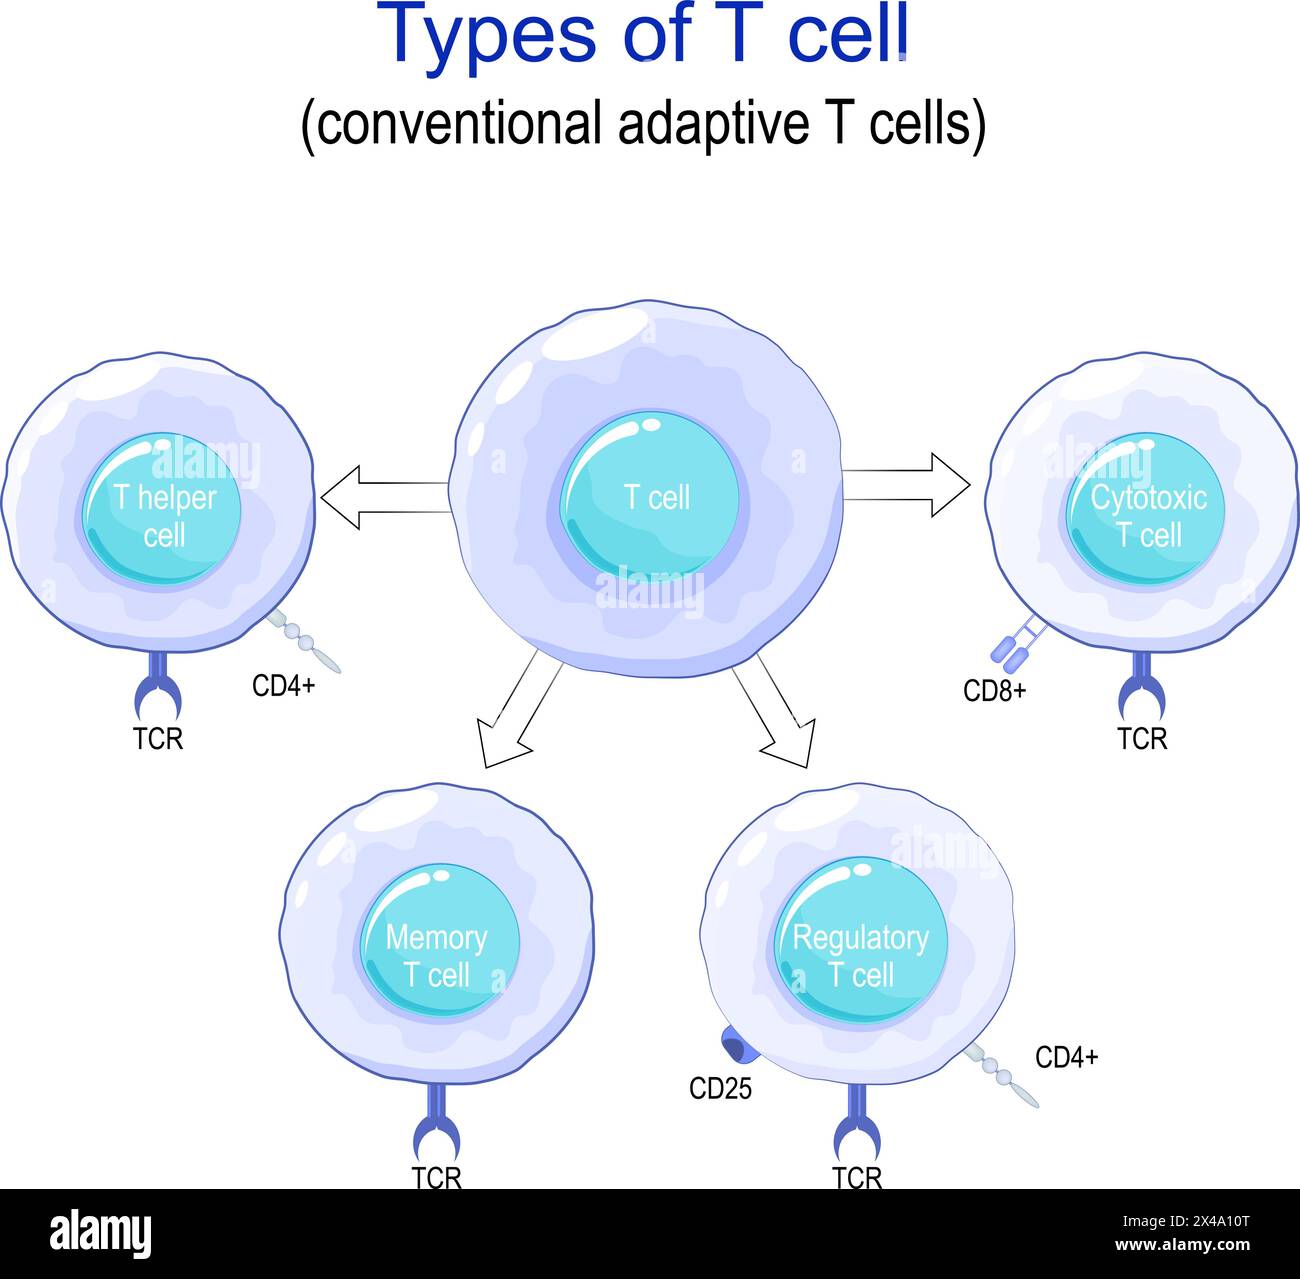 Types of T cell. Close-up of a Conventional adaptive T-cells and main receptors. Regulatory, Memory, Cytotoxic T-cells and T- helper. Immune regulatio Stock Vector